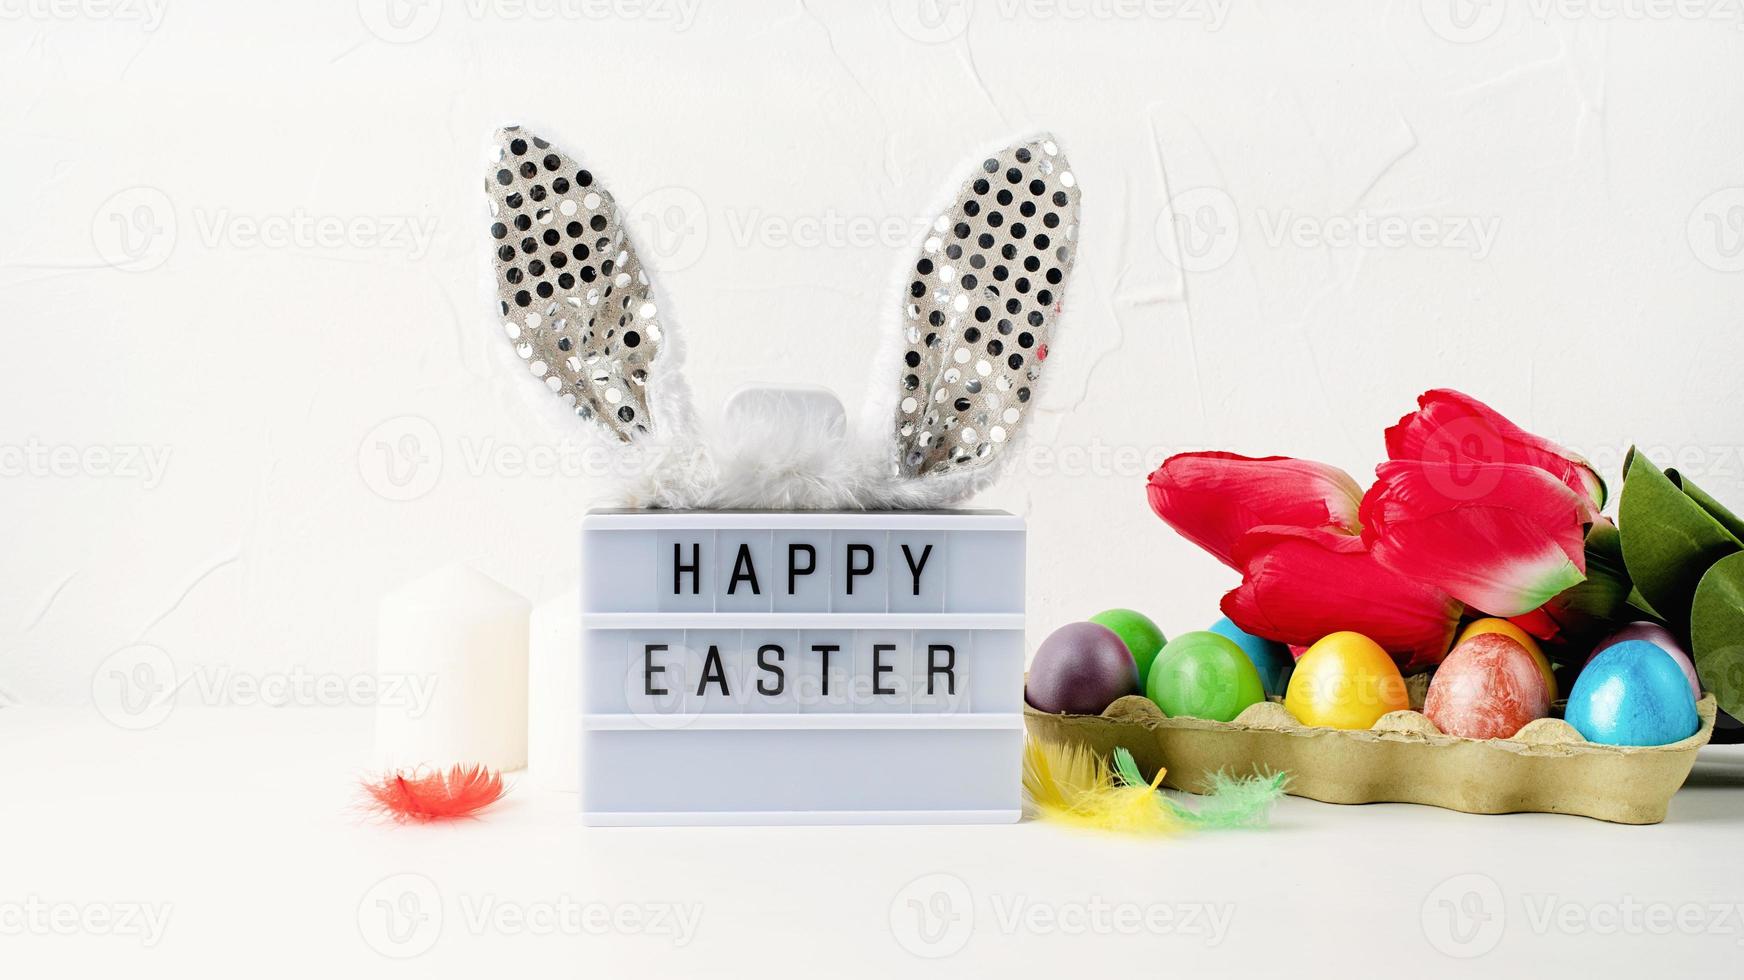 Happy Easter light box with rabbit ears and Easter decorations photo